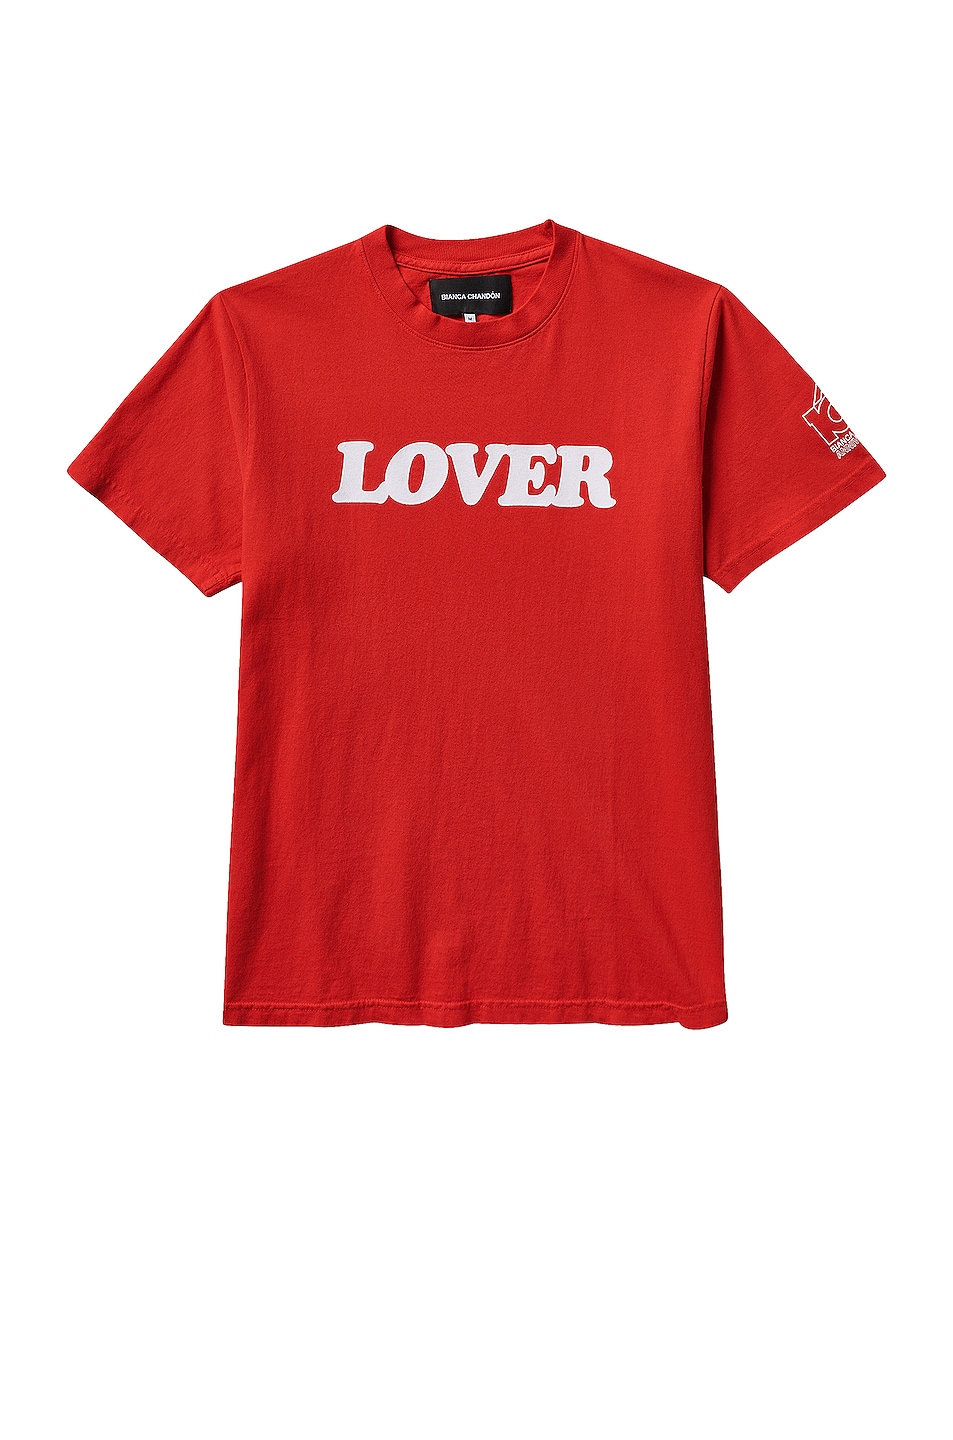 Image 1 of Bianca Chandon Lover 10th Anniversary T-shirt in Red